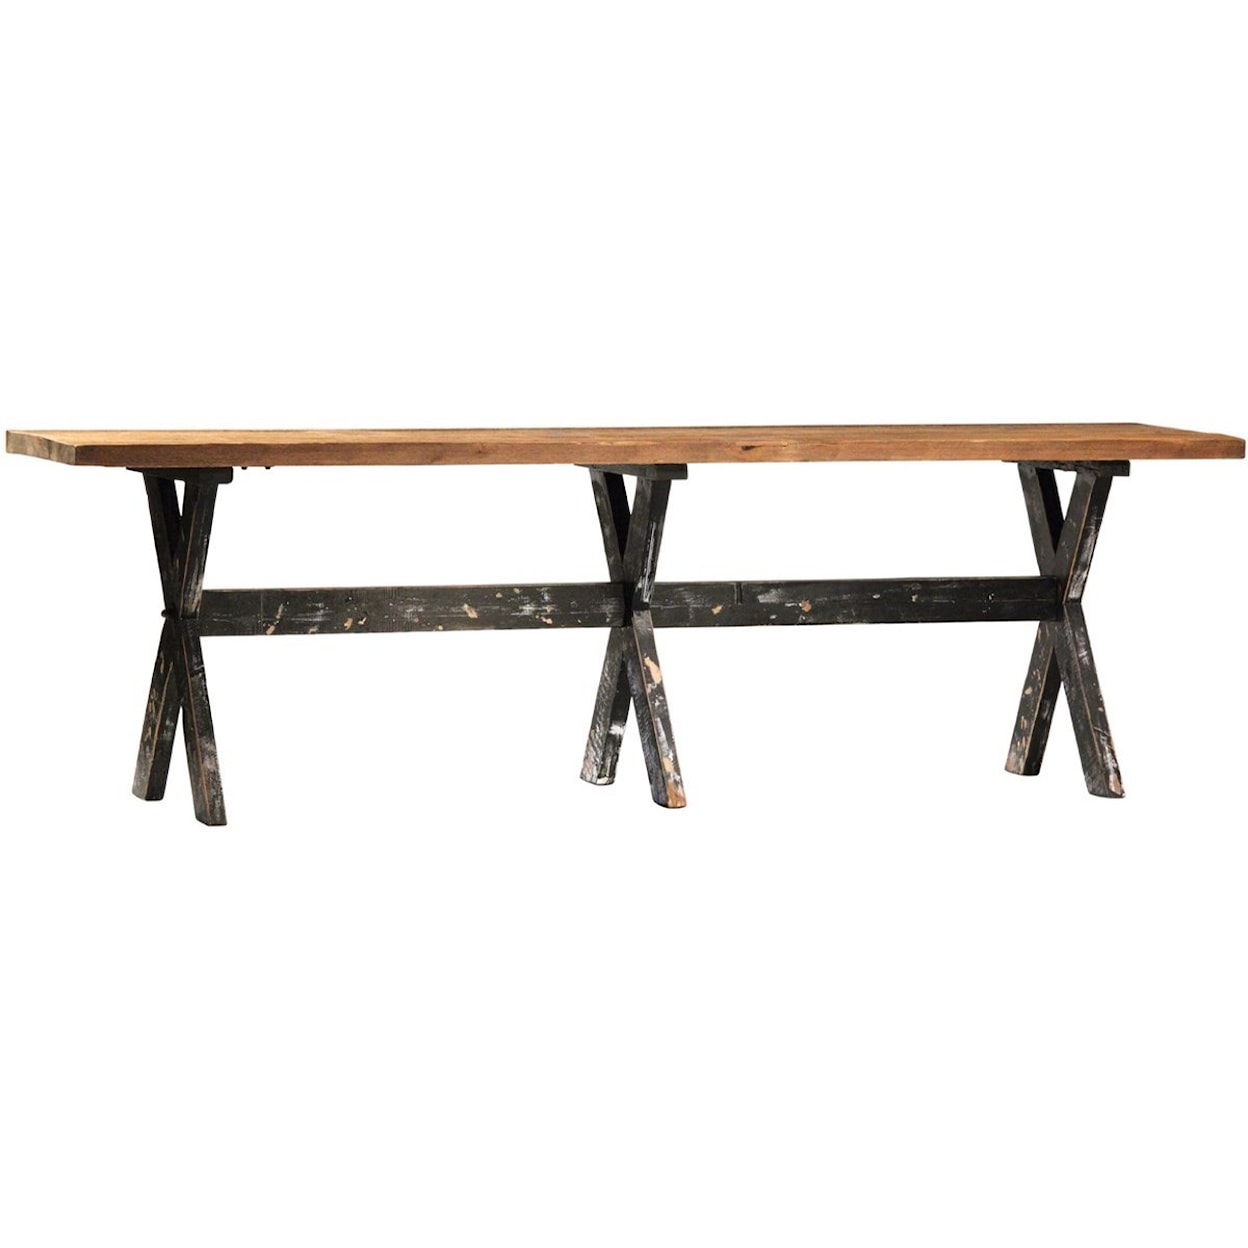 Dovetail Furniture Puebla Reclaimed Wood Counter Table